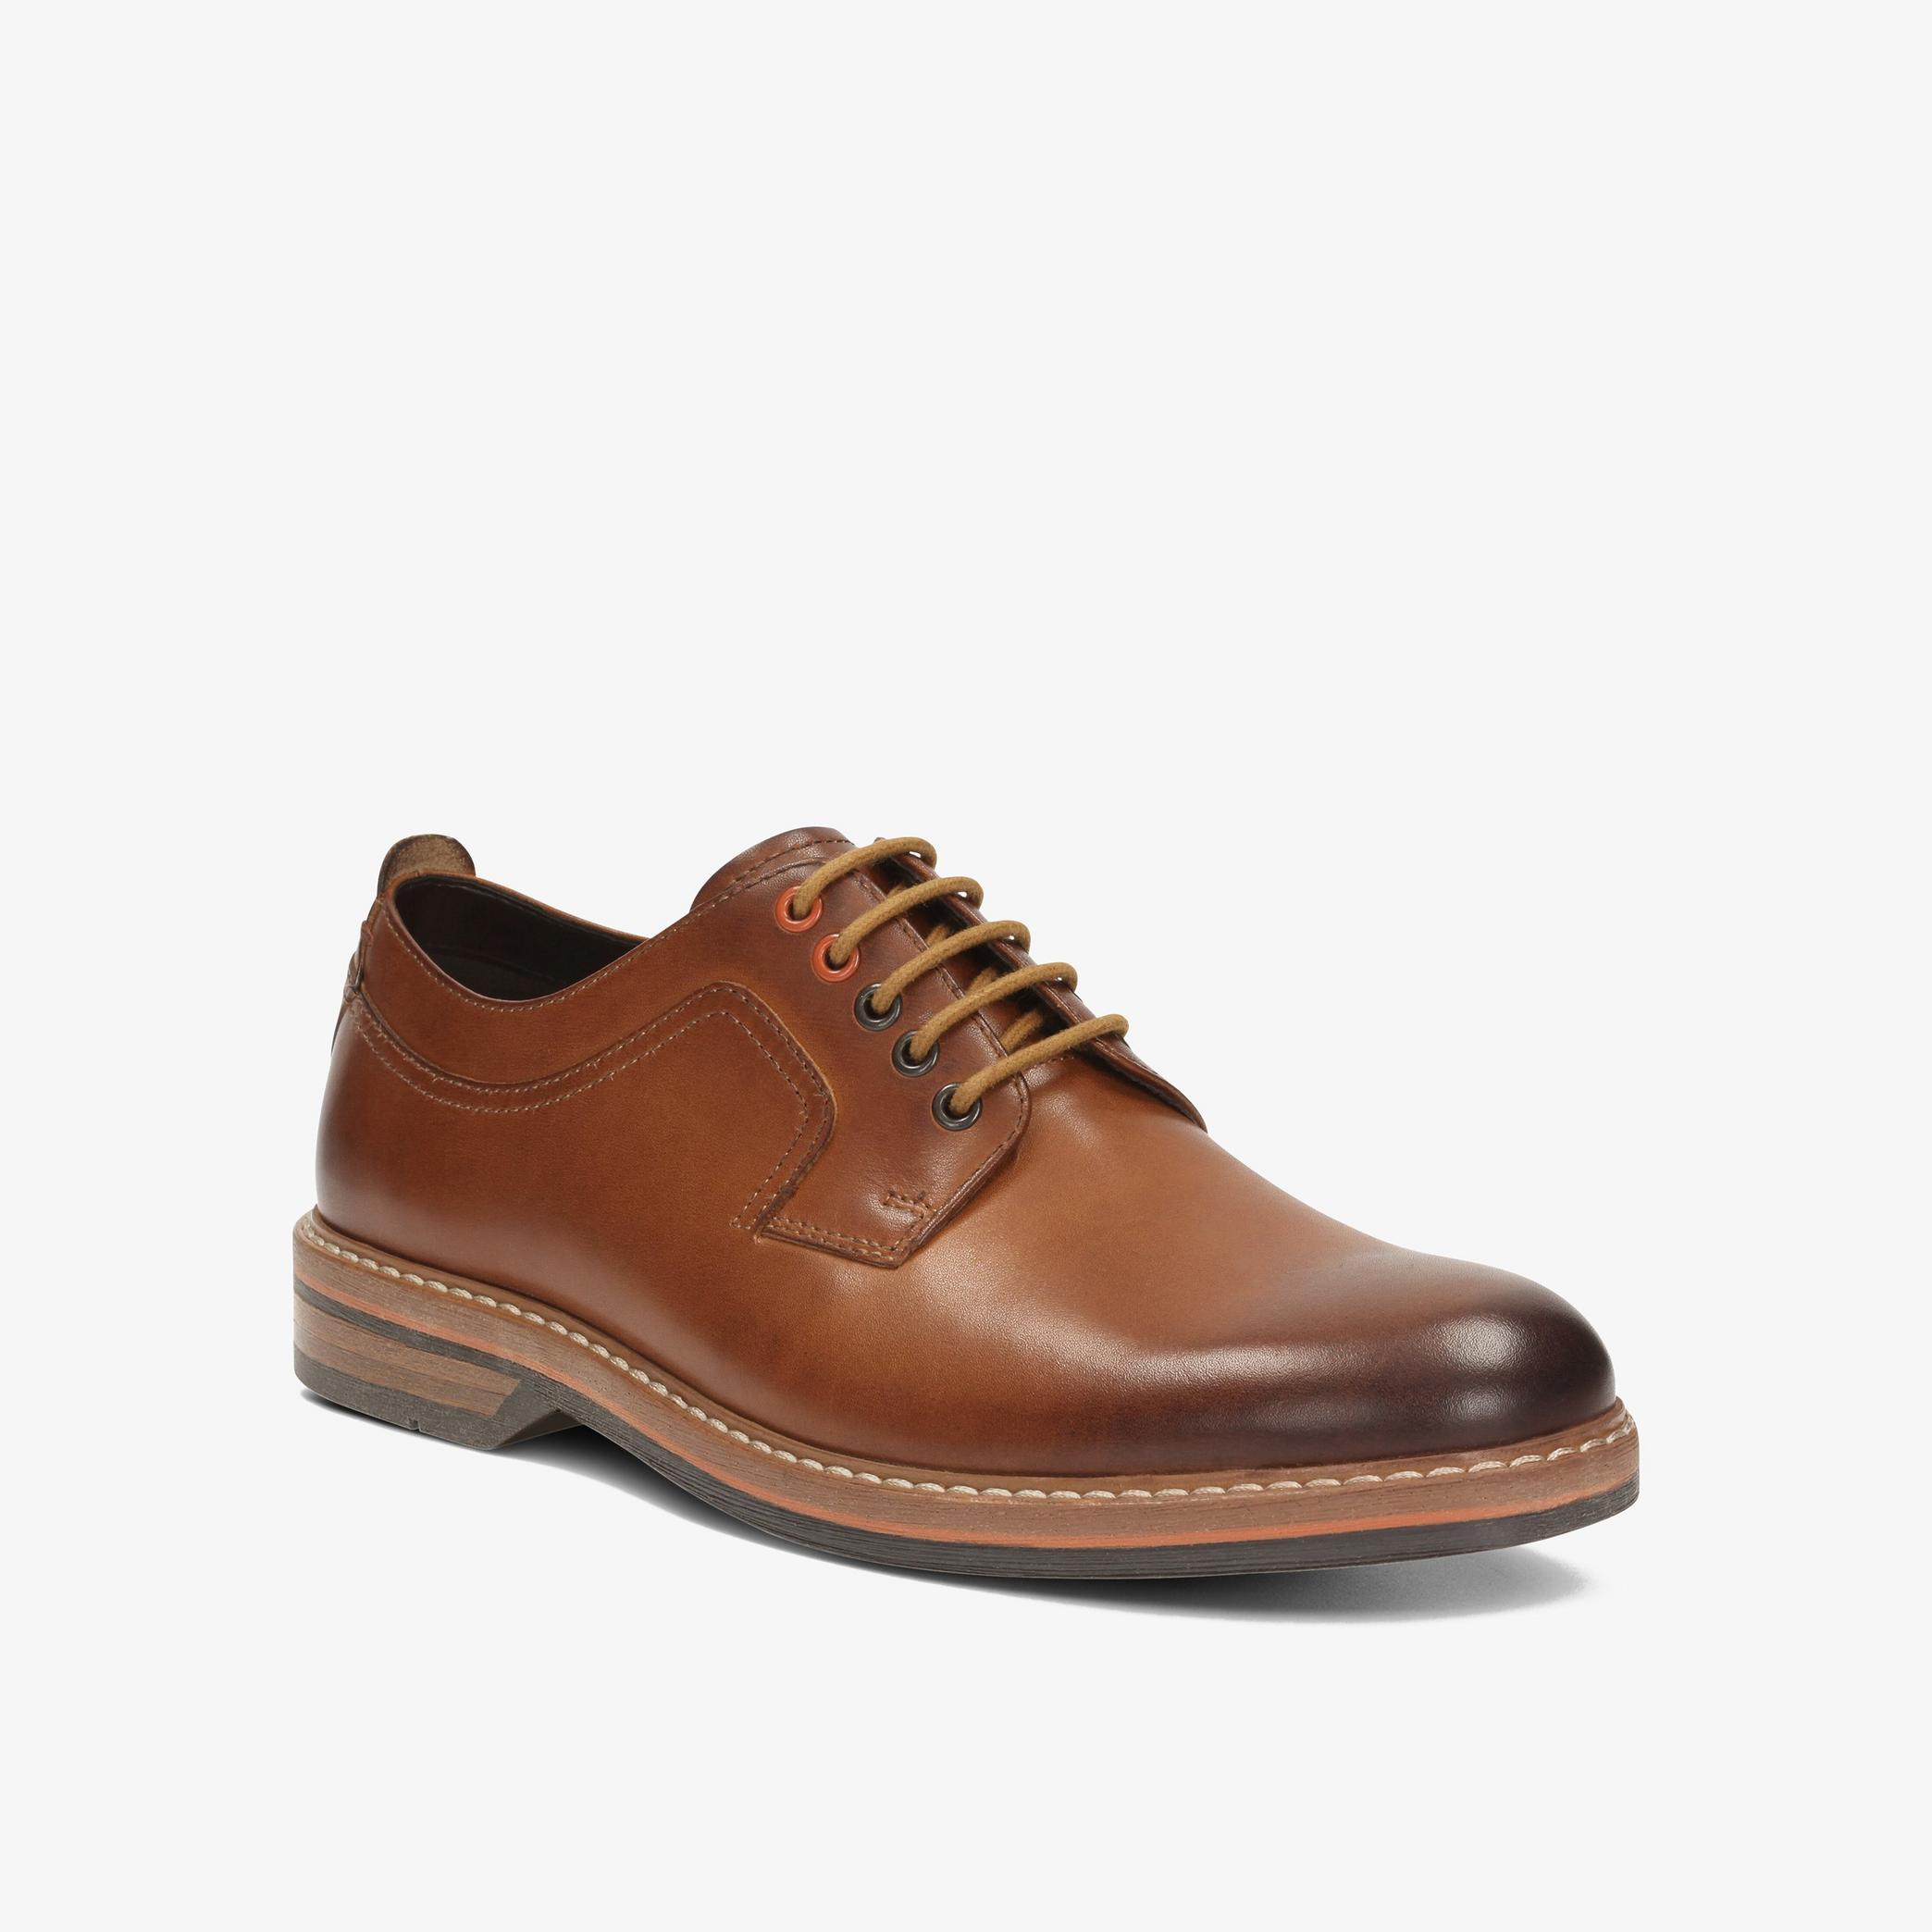 Pitney Walk Cognac Leather Shoes, view 3 of 5